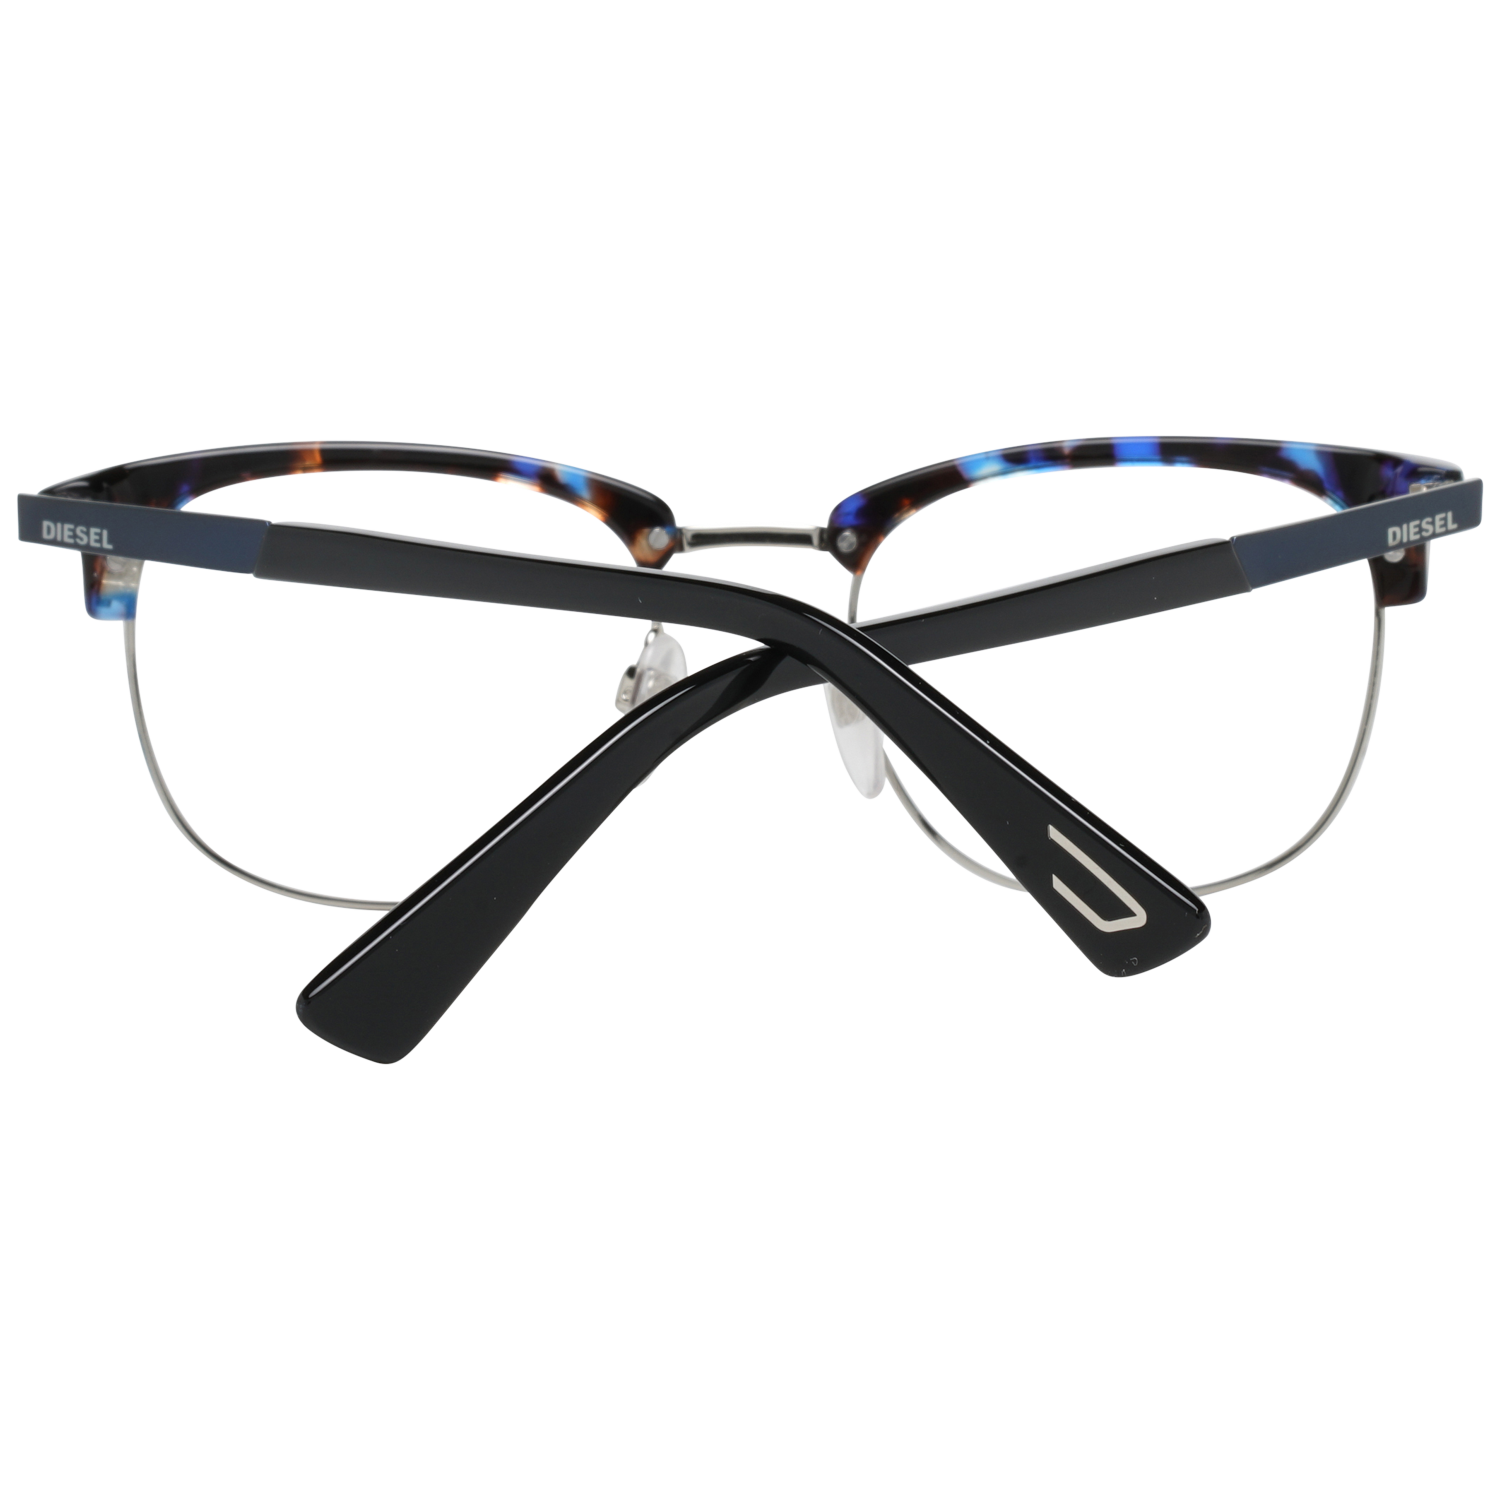 GenderUnisexMain colorBlueFrame colorBlueFrame materialMetal & PlasticSize49-18-145Lenses width49mmLenses heigth38mmBridge length18mmFrame width129mmTemple length145mmShipment includesCase, Cleaning clothStyleFull-RimSpring hingeYes